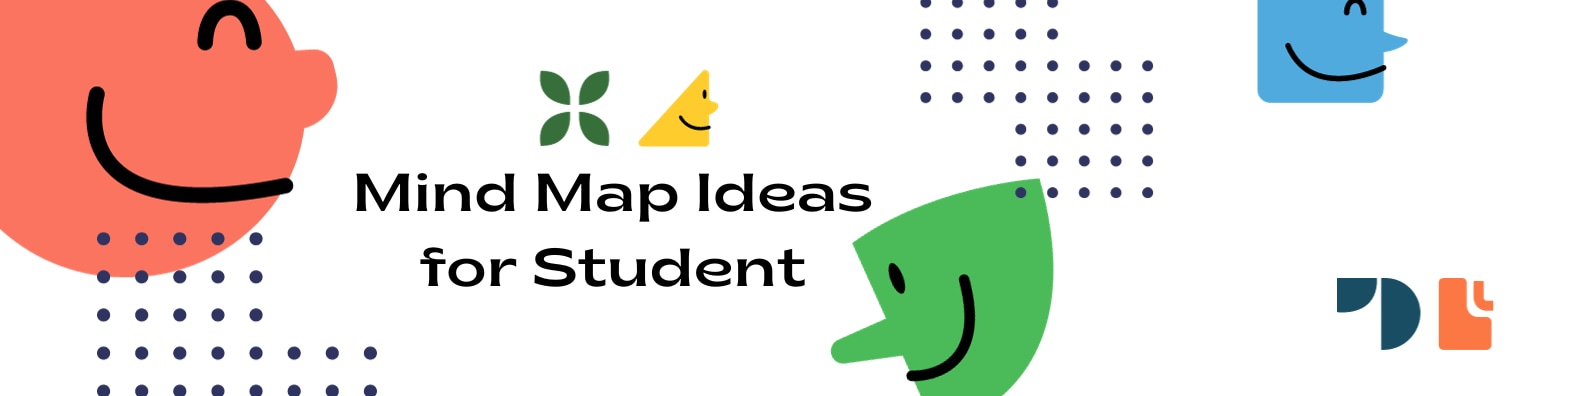 mind map ideas for student